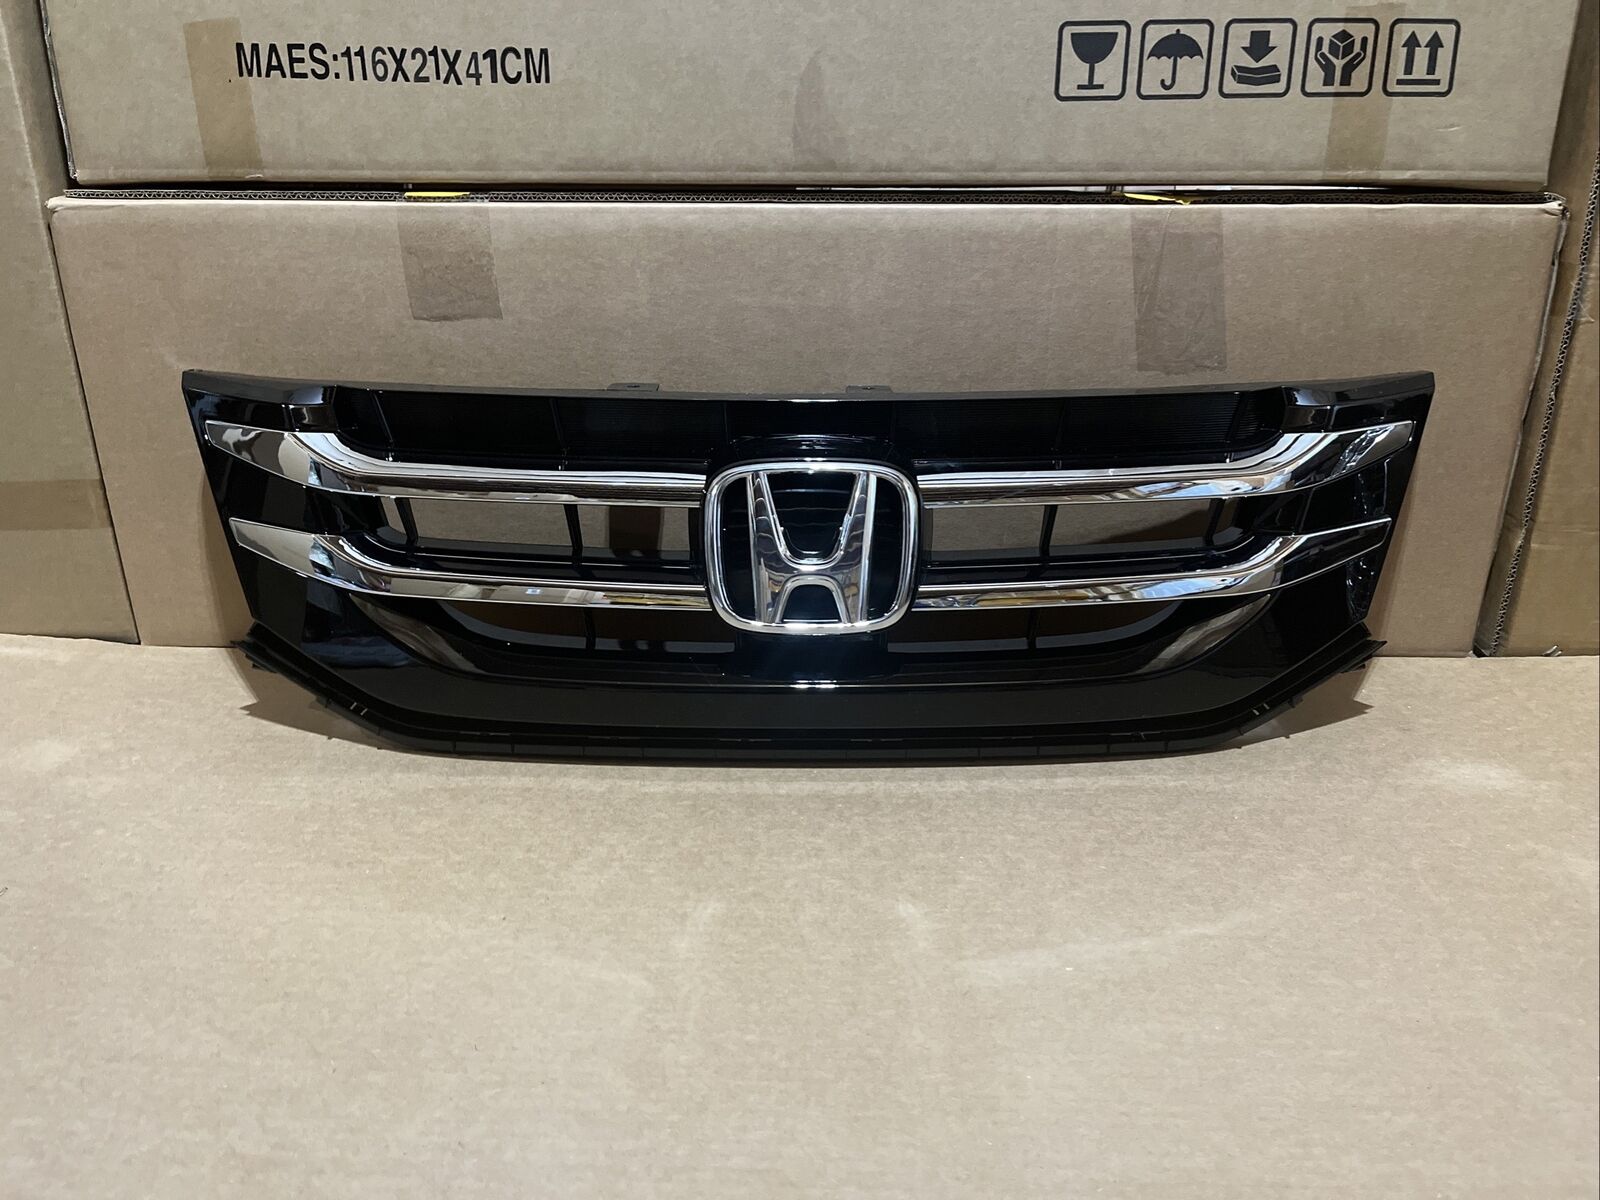 NEW for 2014-2017 ODYSSEY Front Bumper Upper Grille Assembly w/ Chrome & EMBLEM